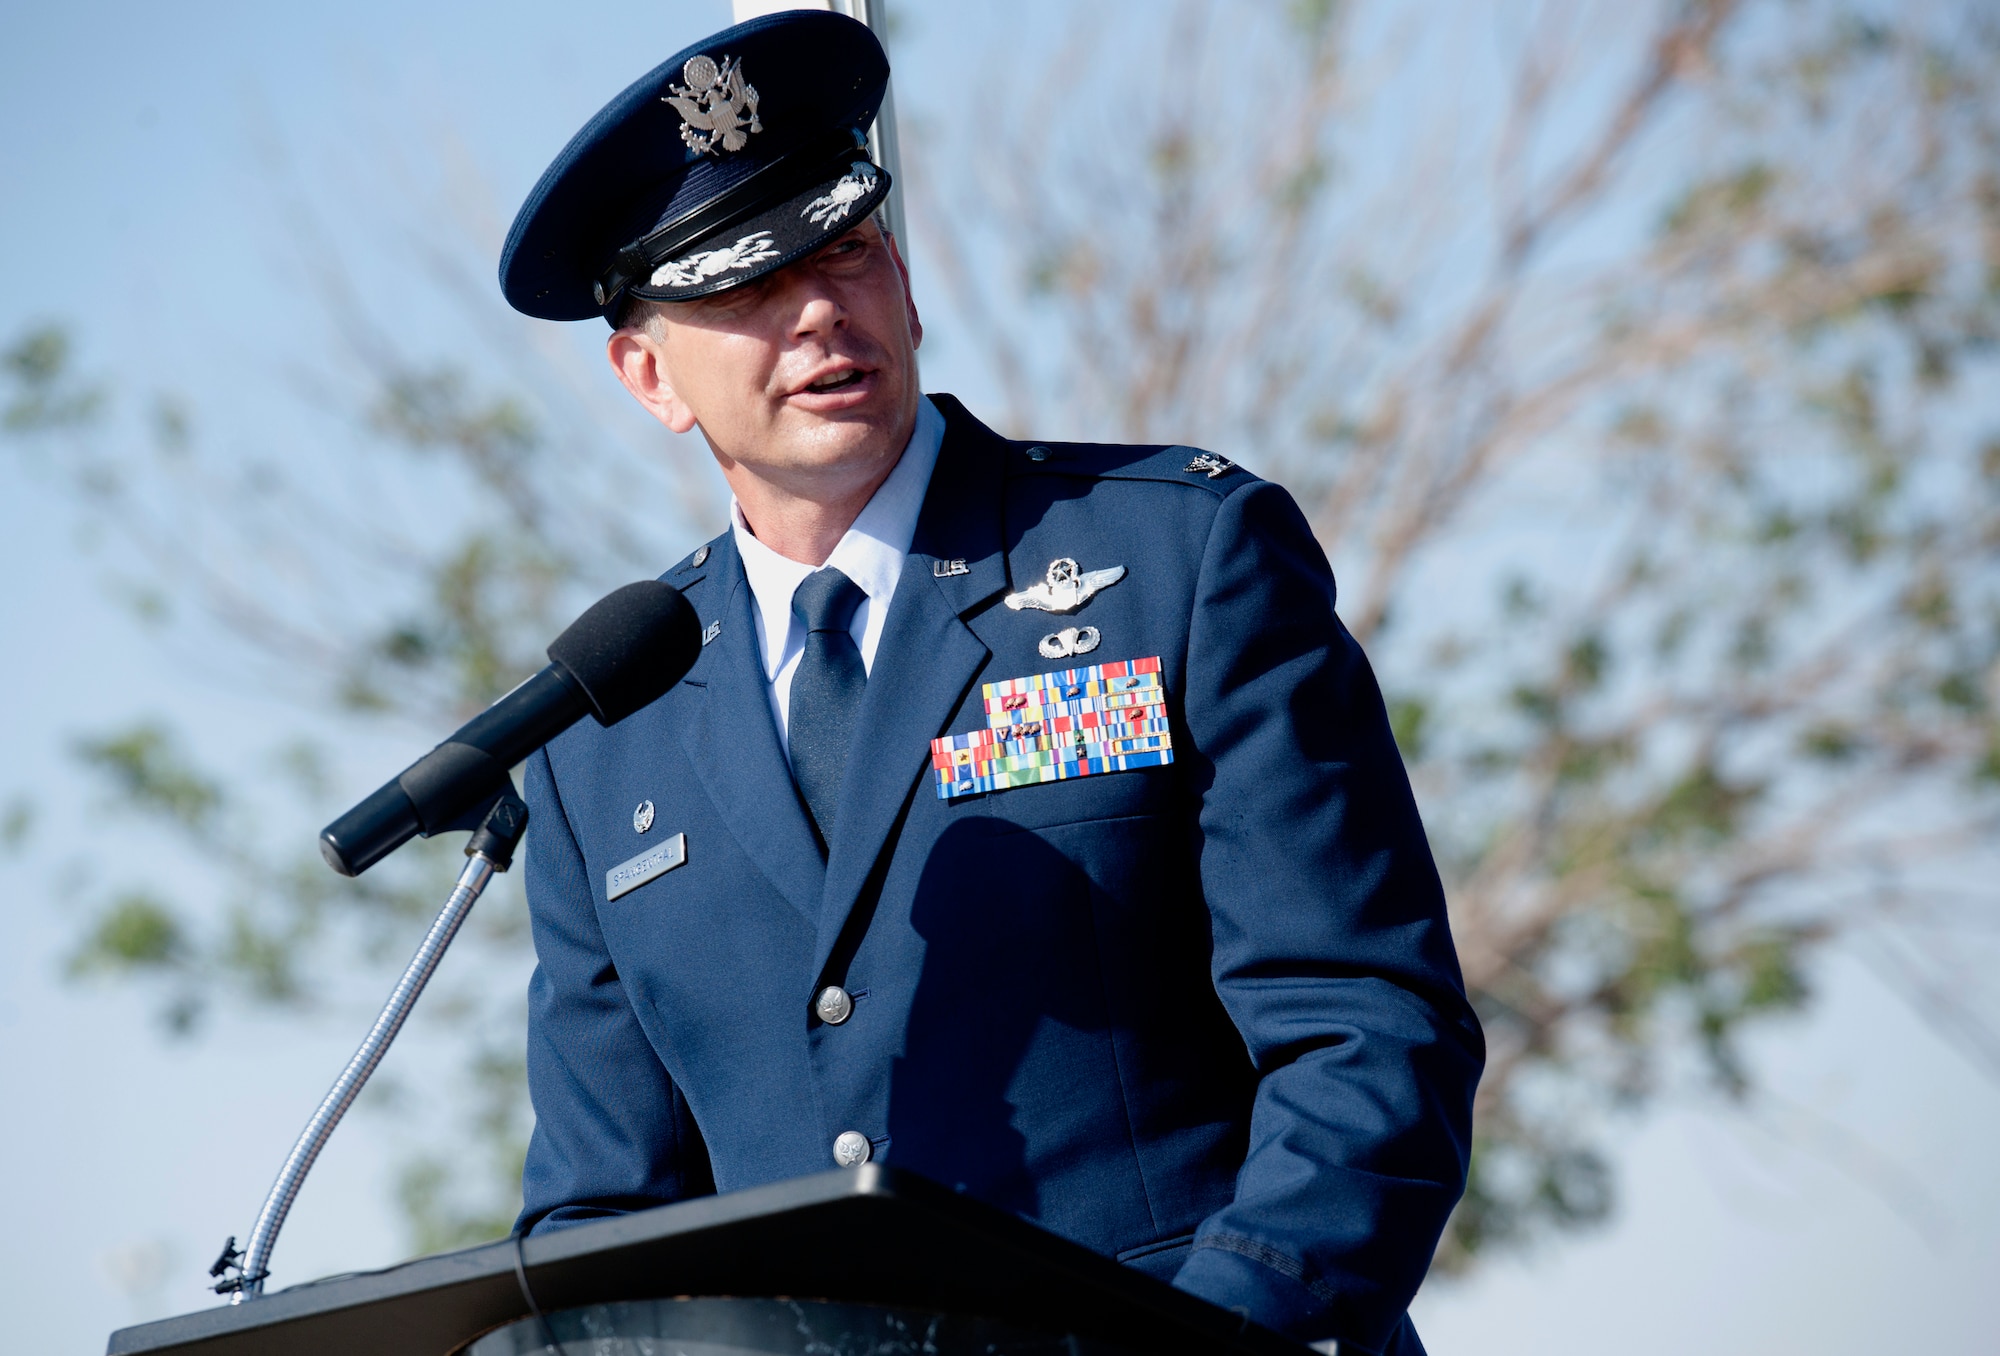 ALTUS AIR FORCE BASE, Okla. – Col. William A. Spangenthal, incoming 97th AMW commander, expresses his appreciation to his family, the community and 97th AMW personnel during the 97th AMW change of command ceremony at Wings of Freedom Park, June 27. Col. Spangenthal assumed command of Altus AFB from Col. Anthony B. Krawietz, 97th Air Mobility Wing commander. (U.S. Air Force photo by Senior Airman Jesse Lopez / Released)